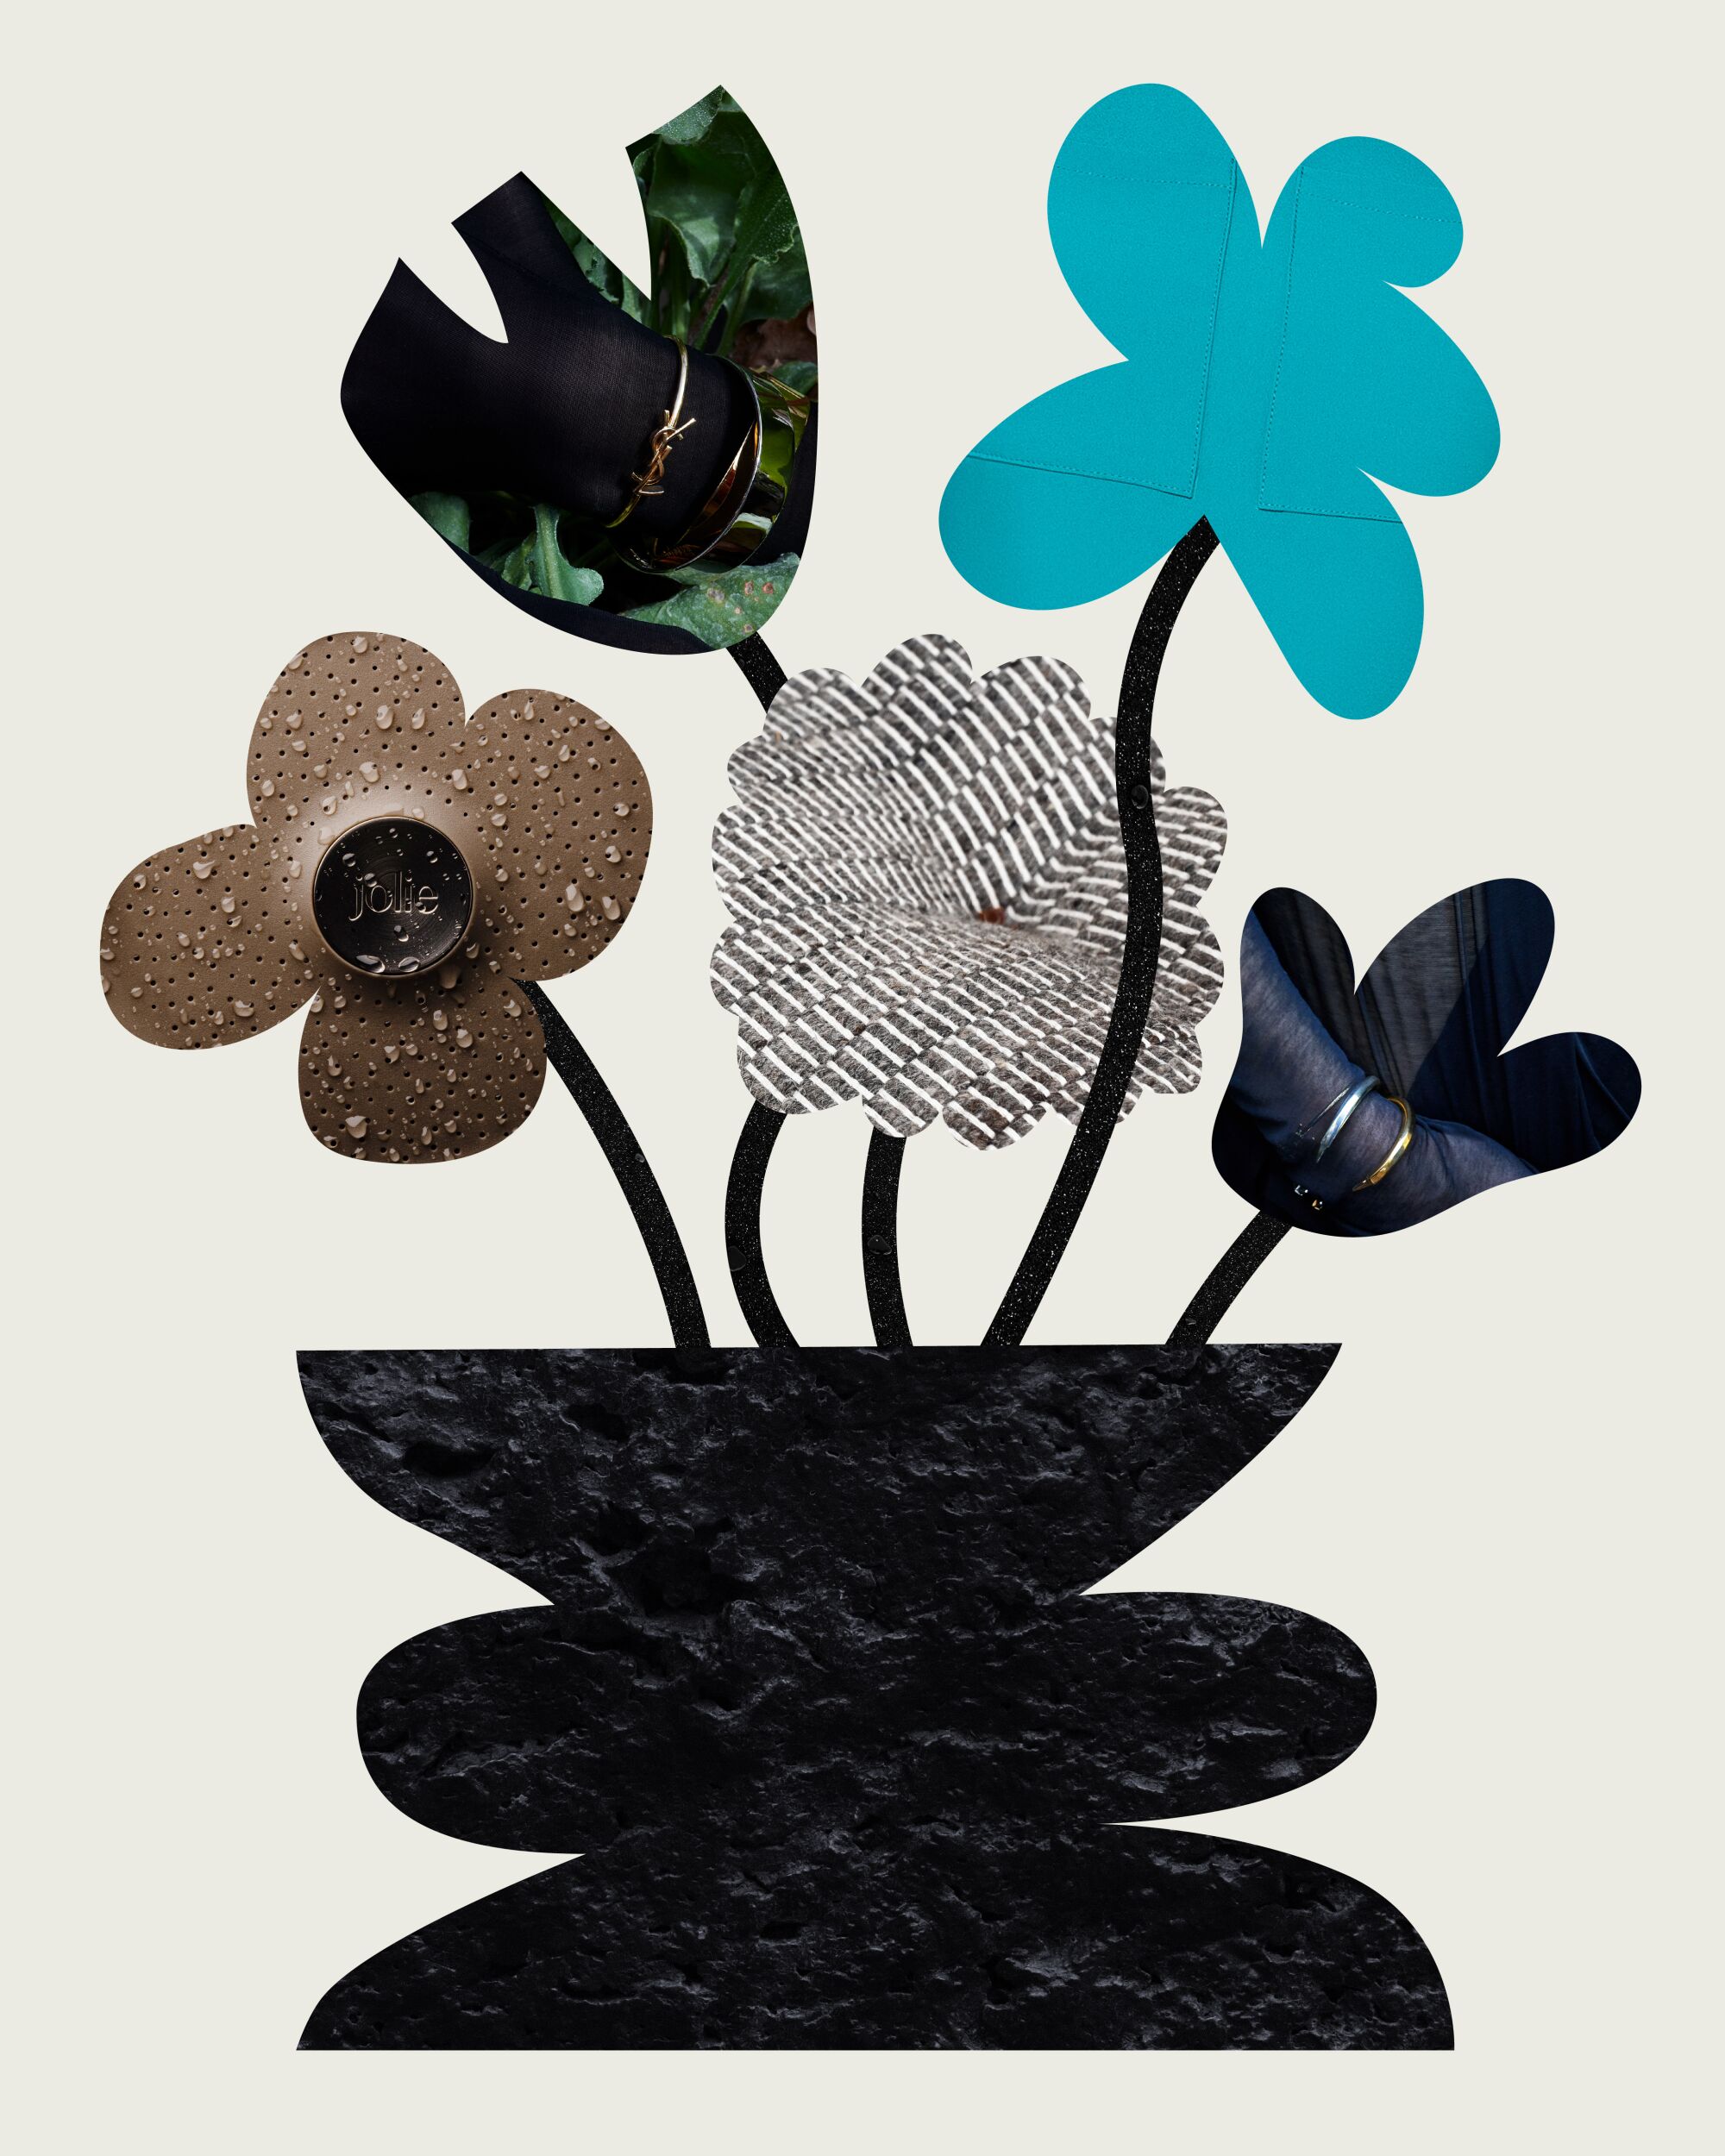 flower cutouts with different textures and colors arranged in a black geometric stone vase